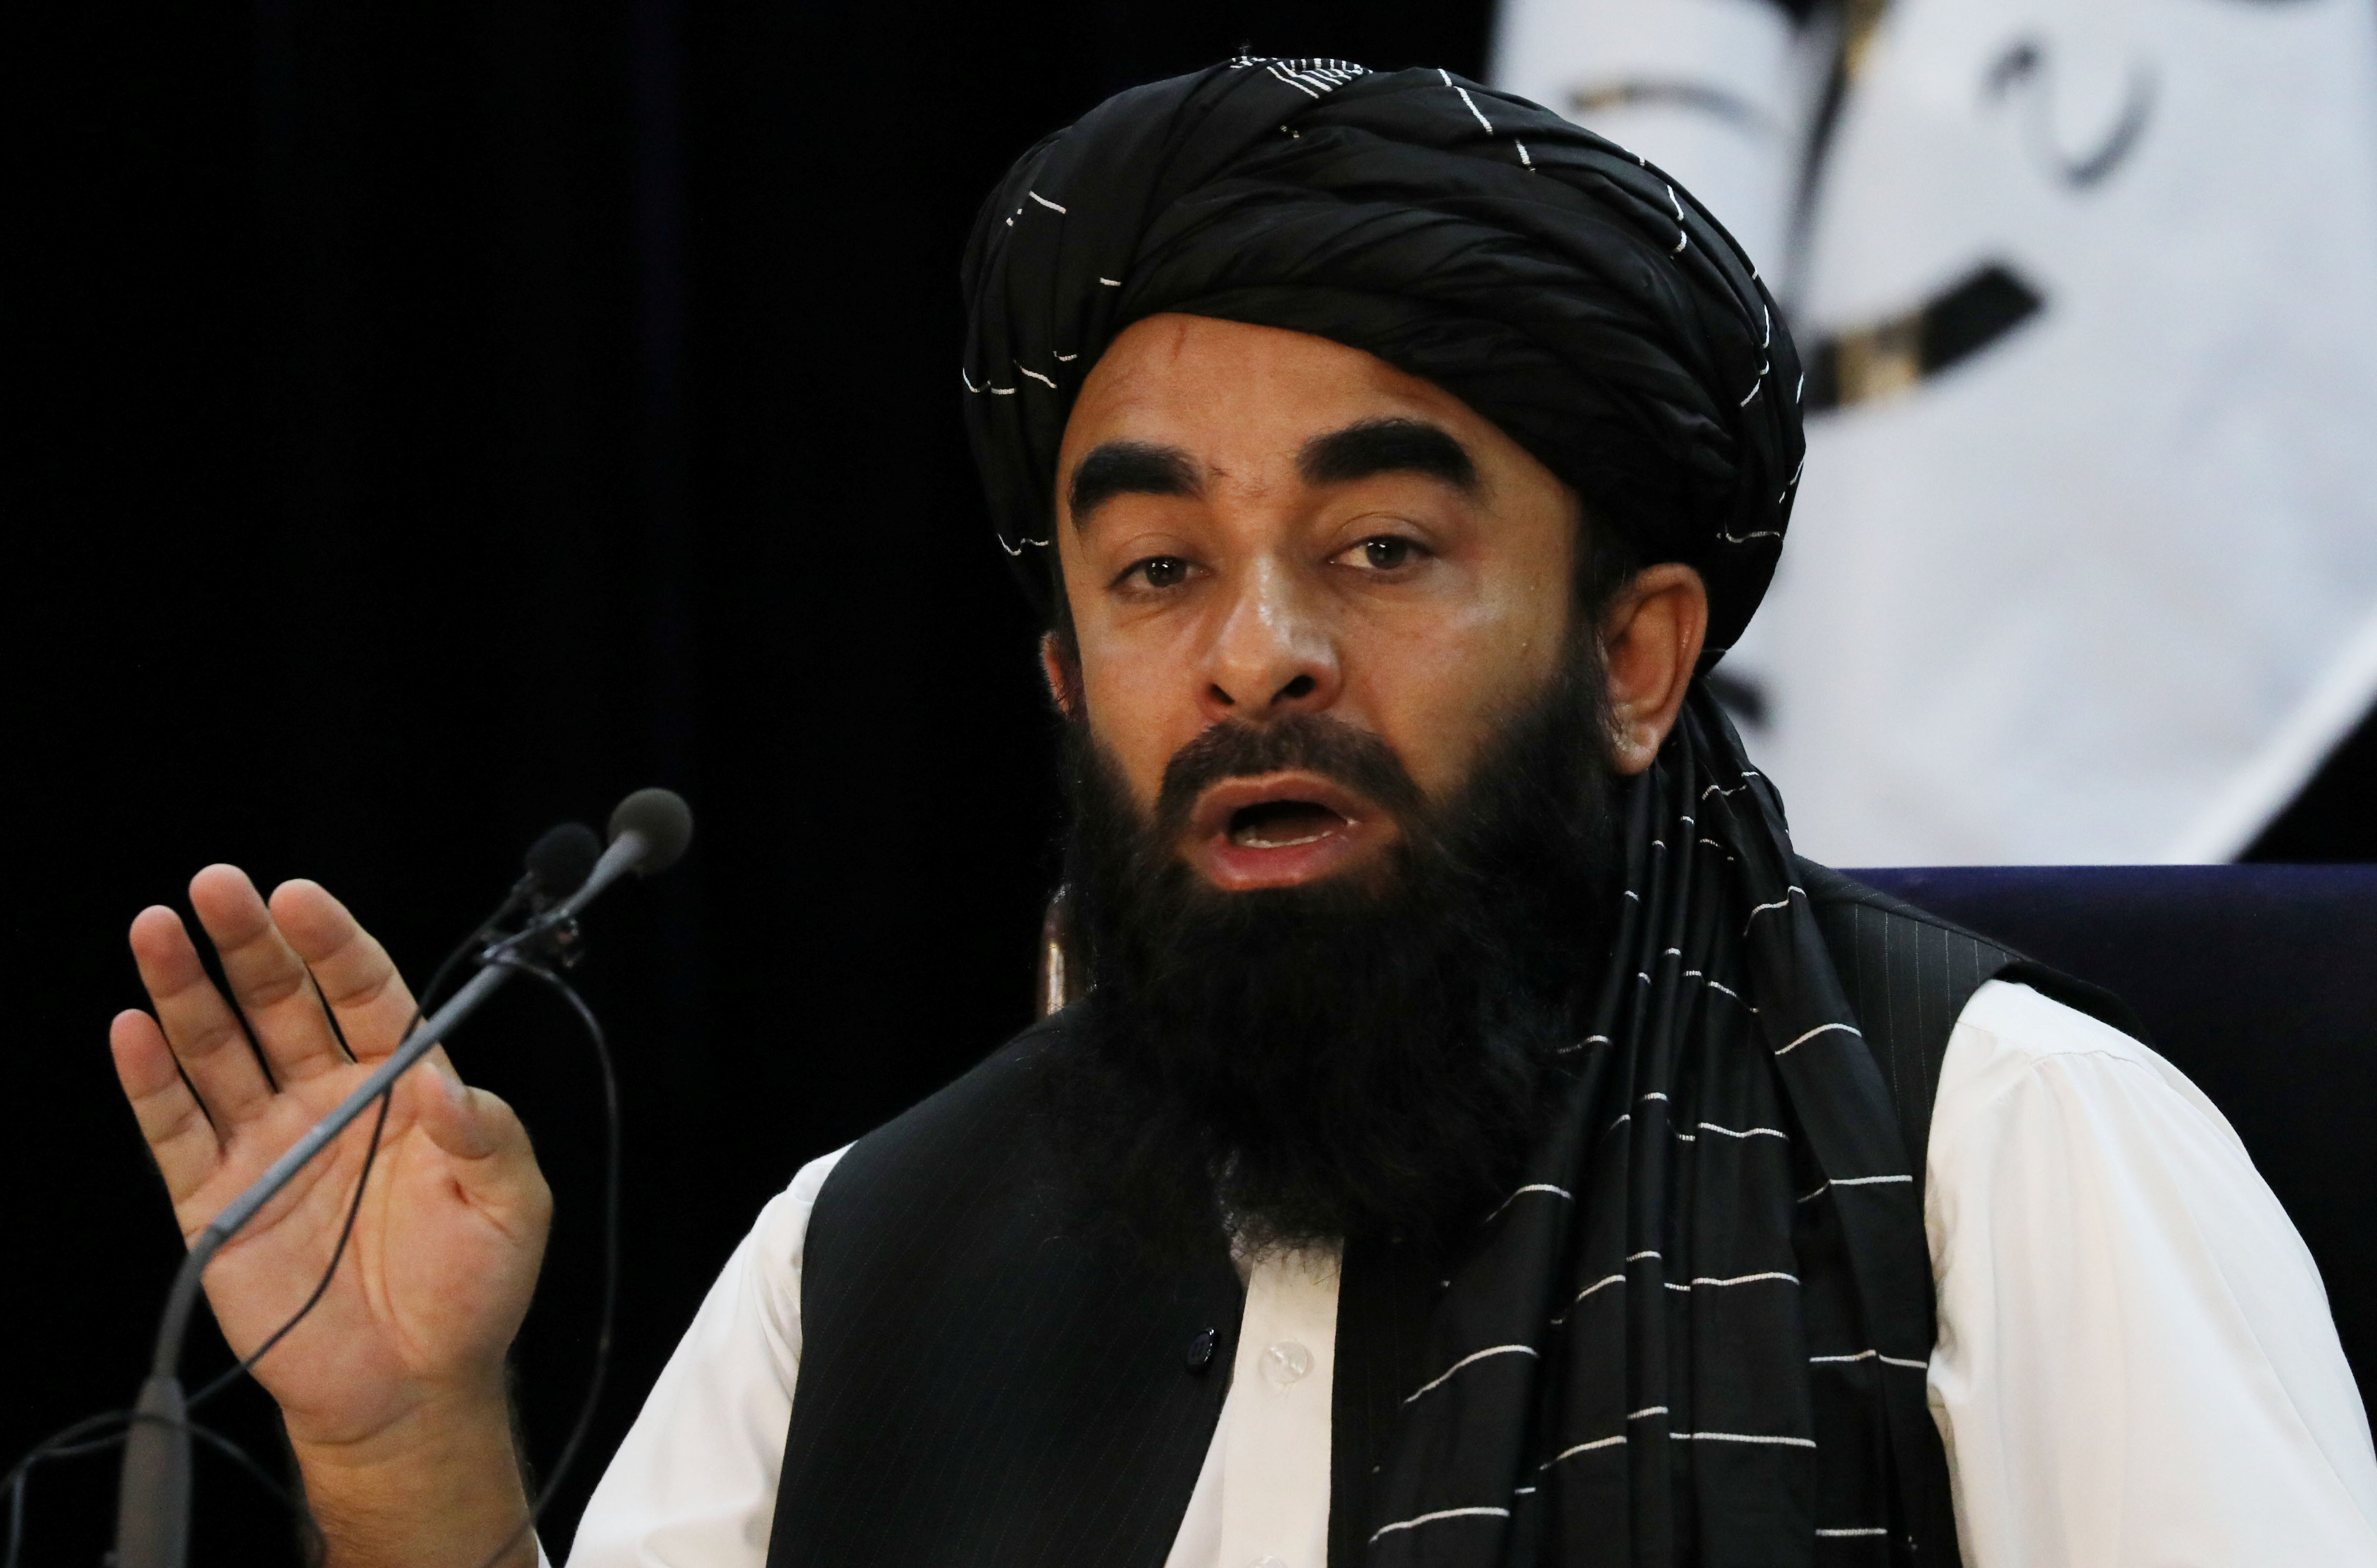 Taliban condemn 'biased' UN report, say Afghans 'living peacefully'